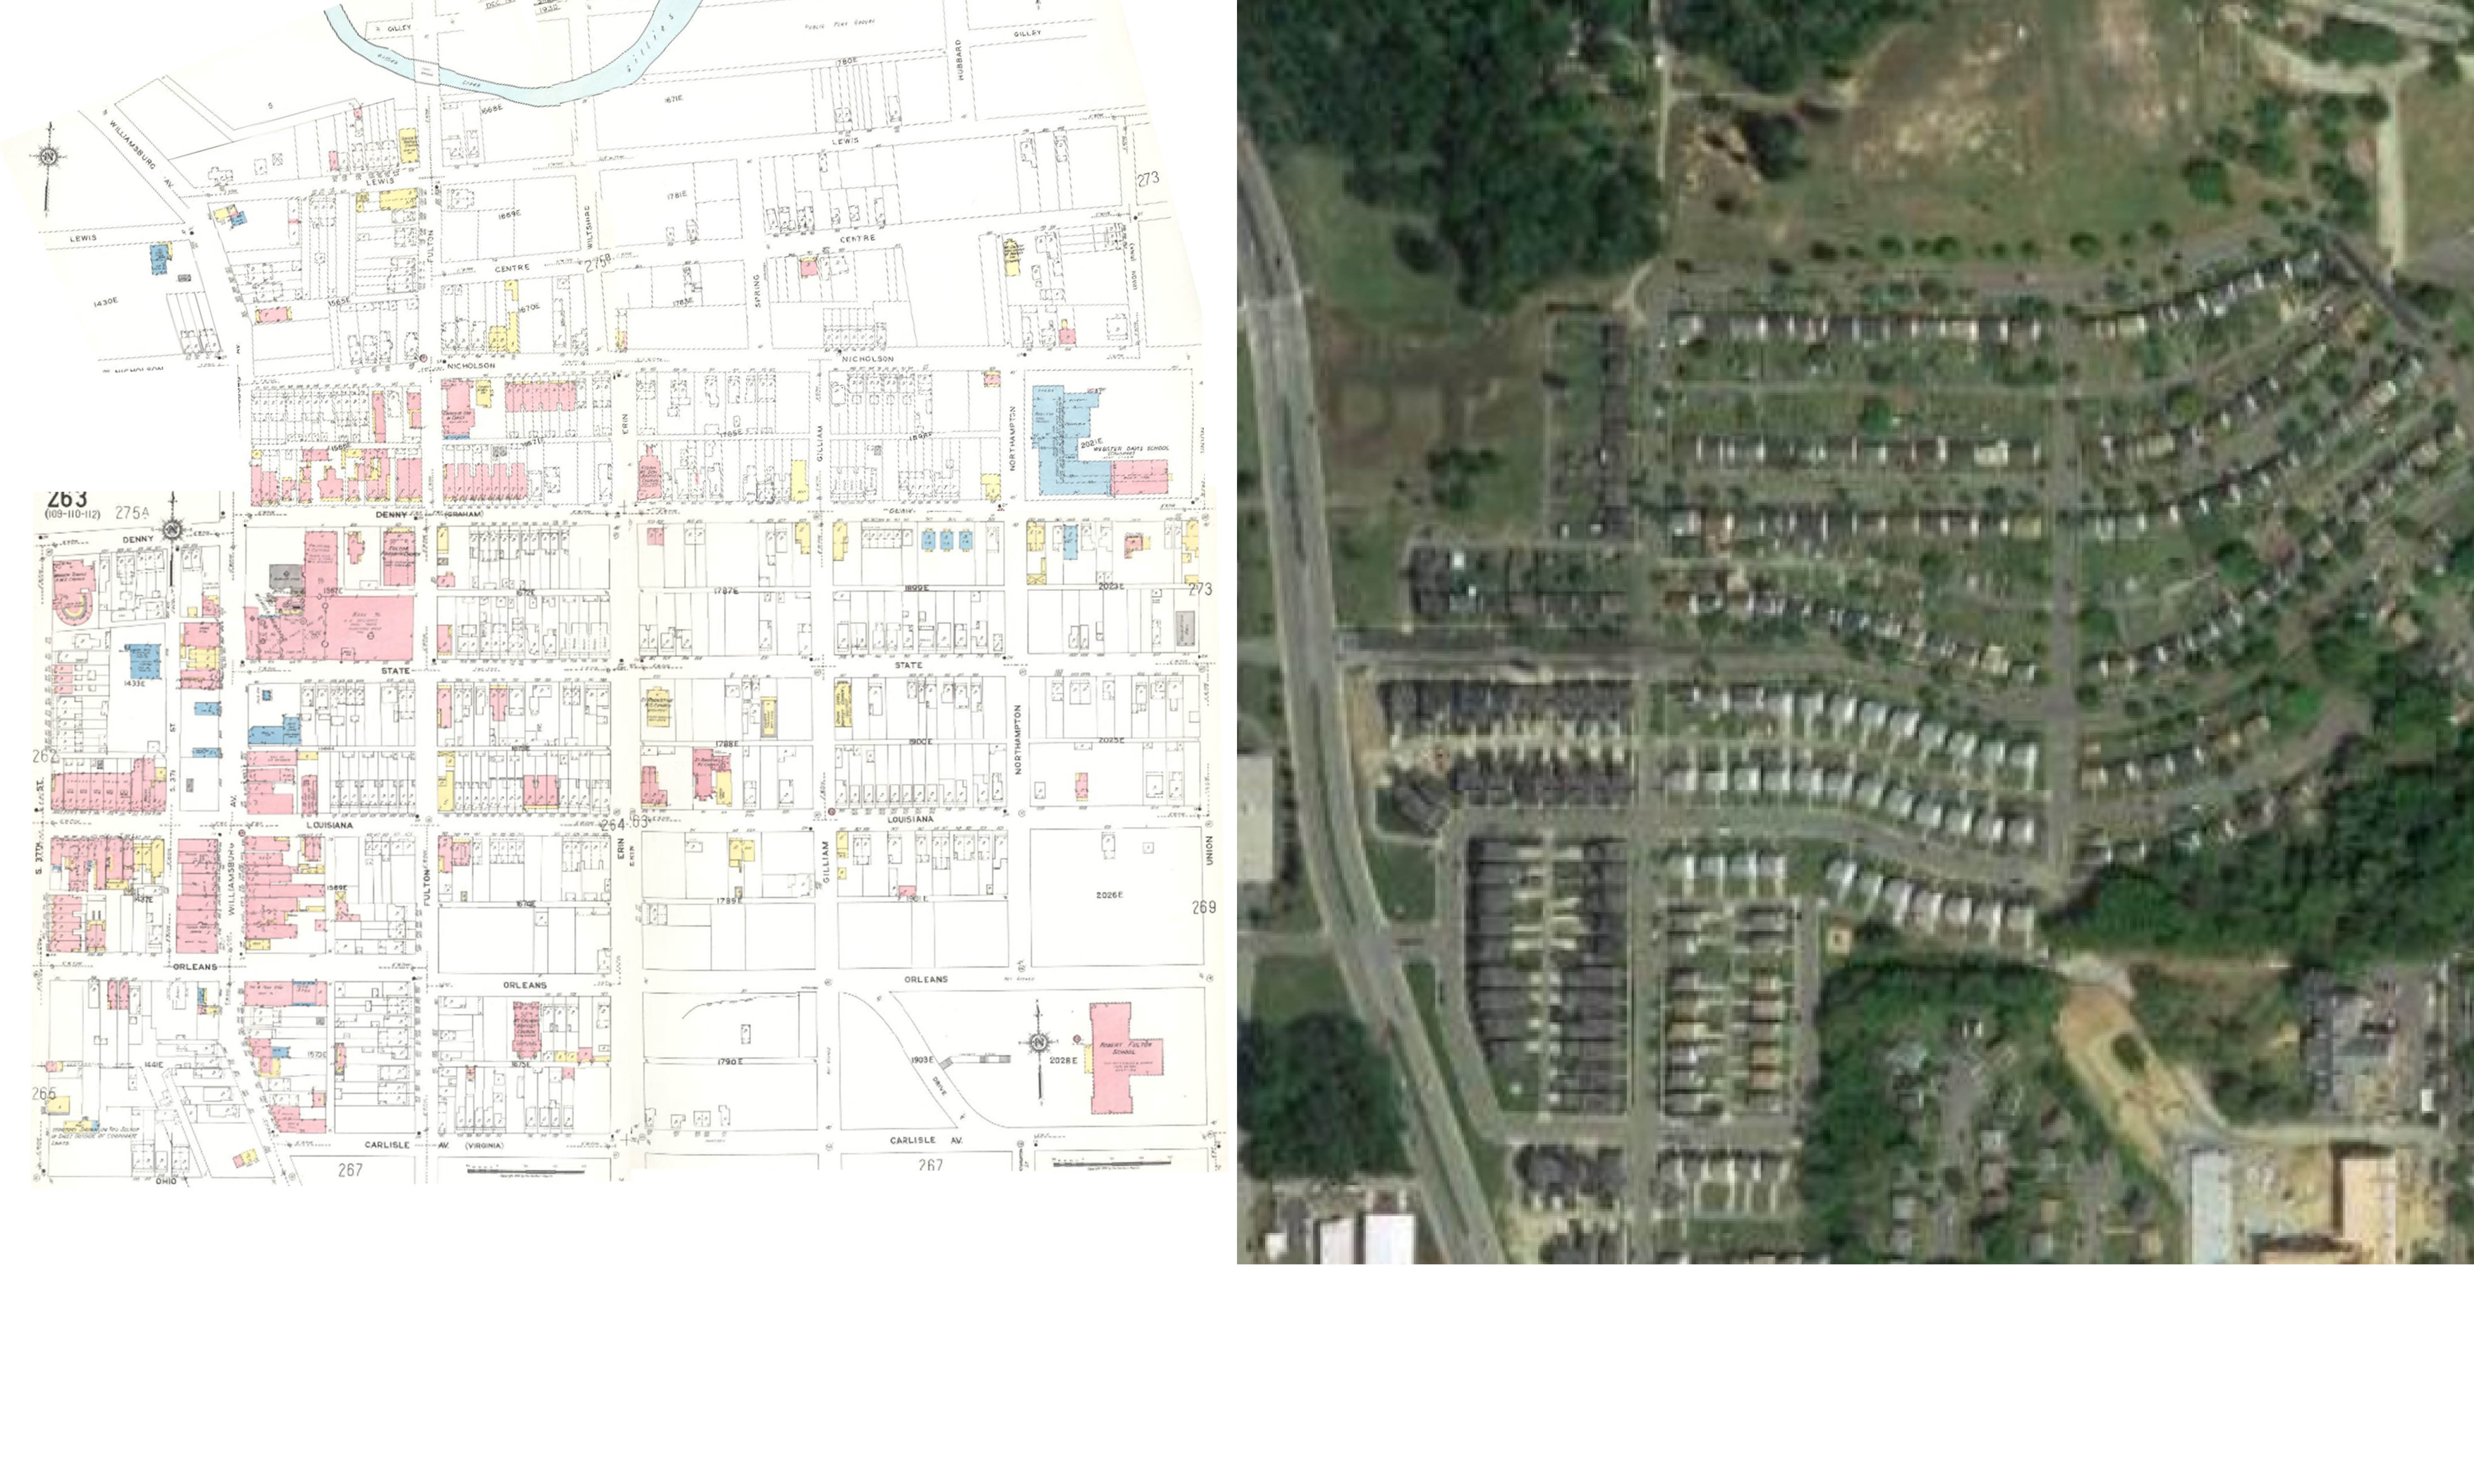 This image compares a historic site plan map with a much denser housing layout than the aerial photo next to it which shows a more suburban style land use pattern